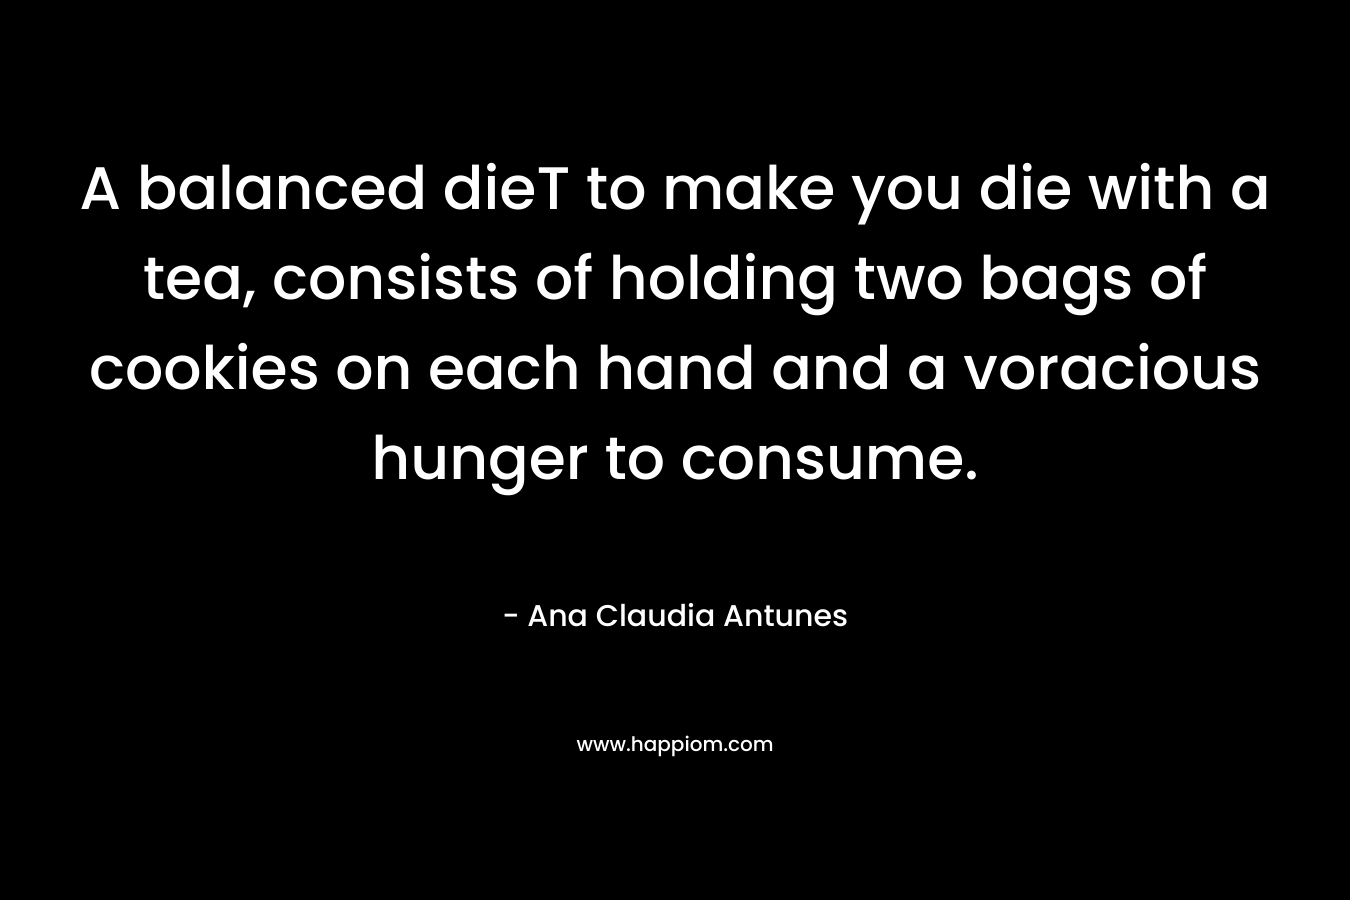 A balanced dieT to make you die with a tea, consists of holding two bags of cookies on each hand and a voracious hunger to consume. – Ana Claudia Antunes